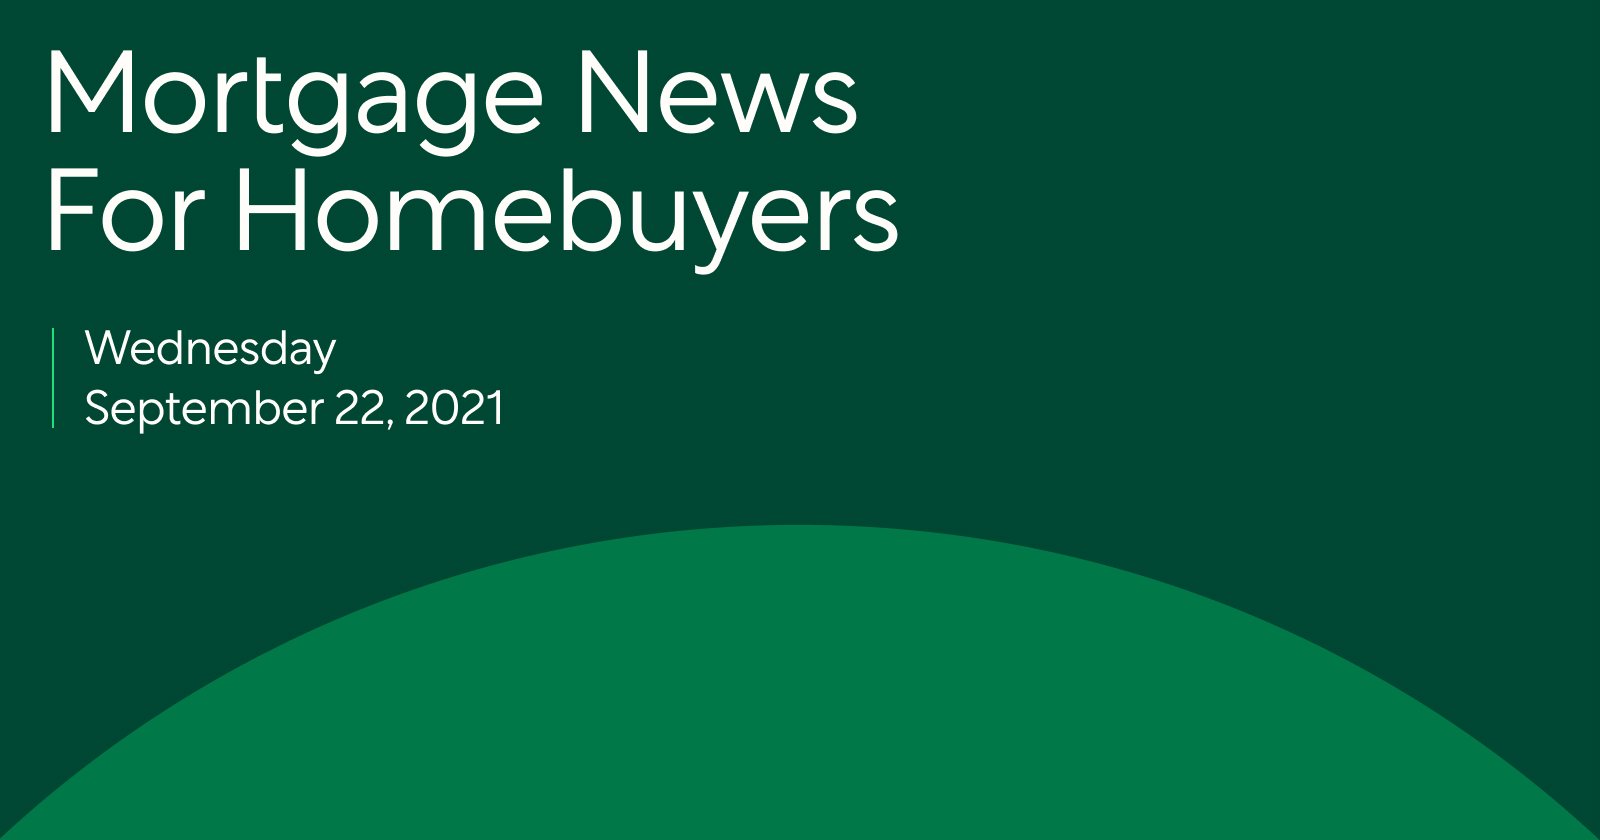 Mortgage News: Prepare For A Wave Of New Listings This Month